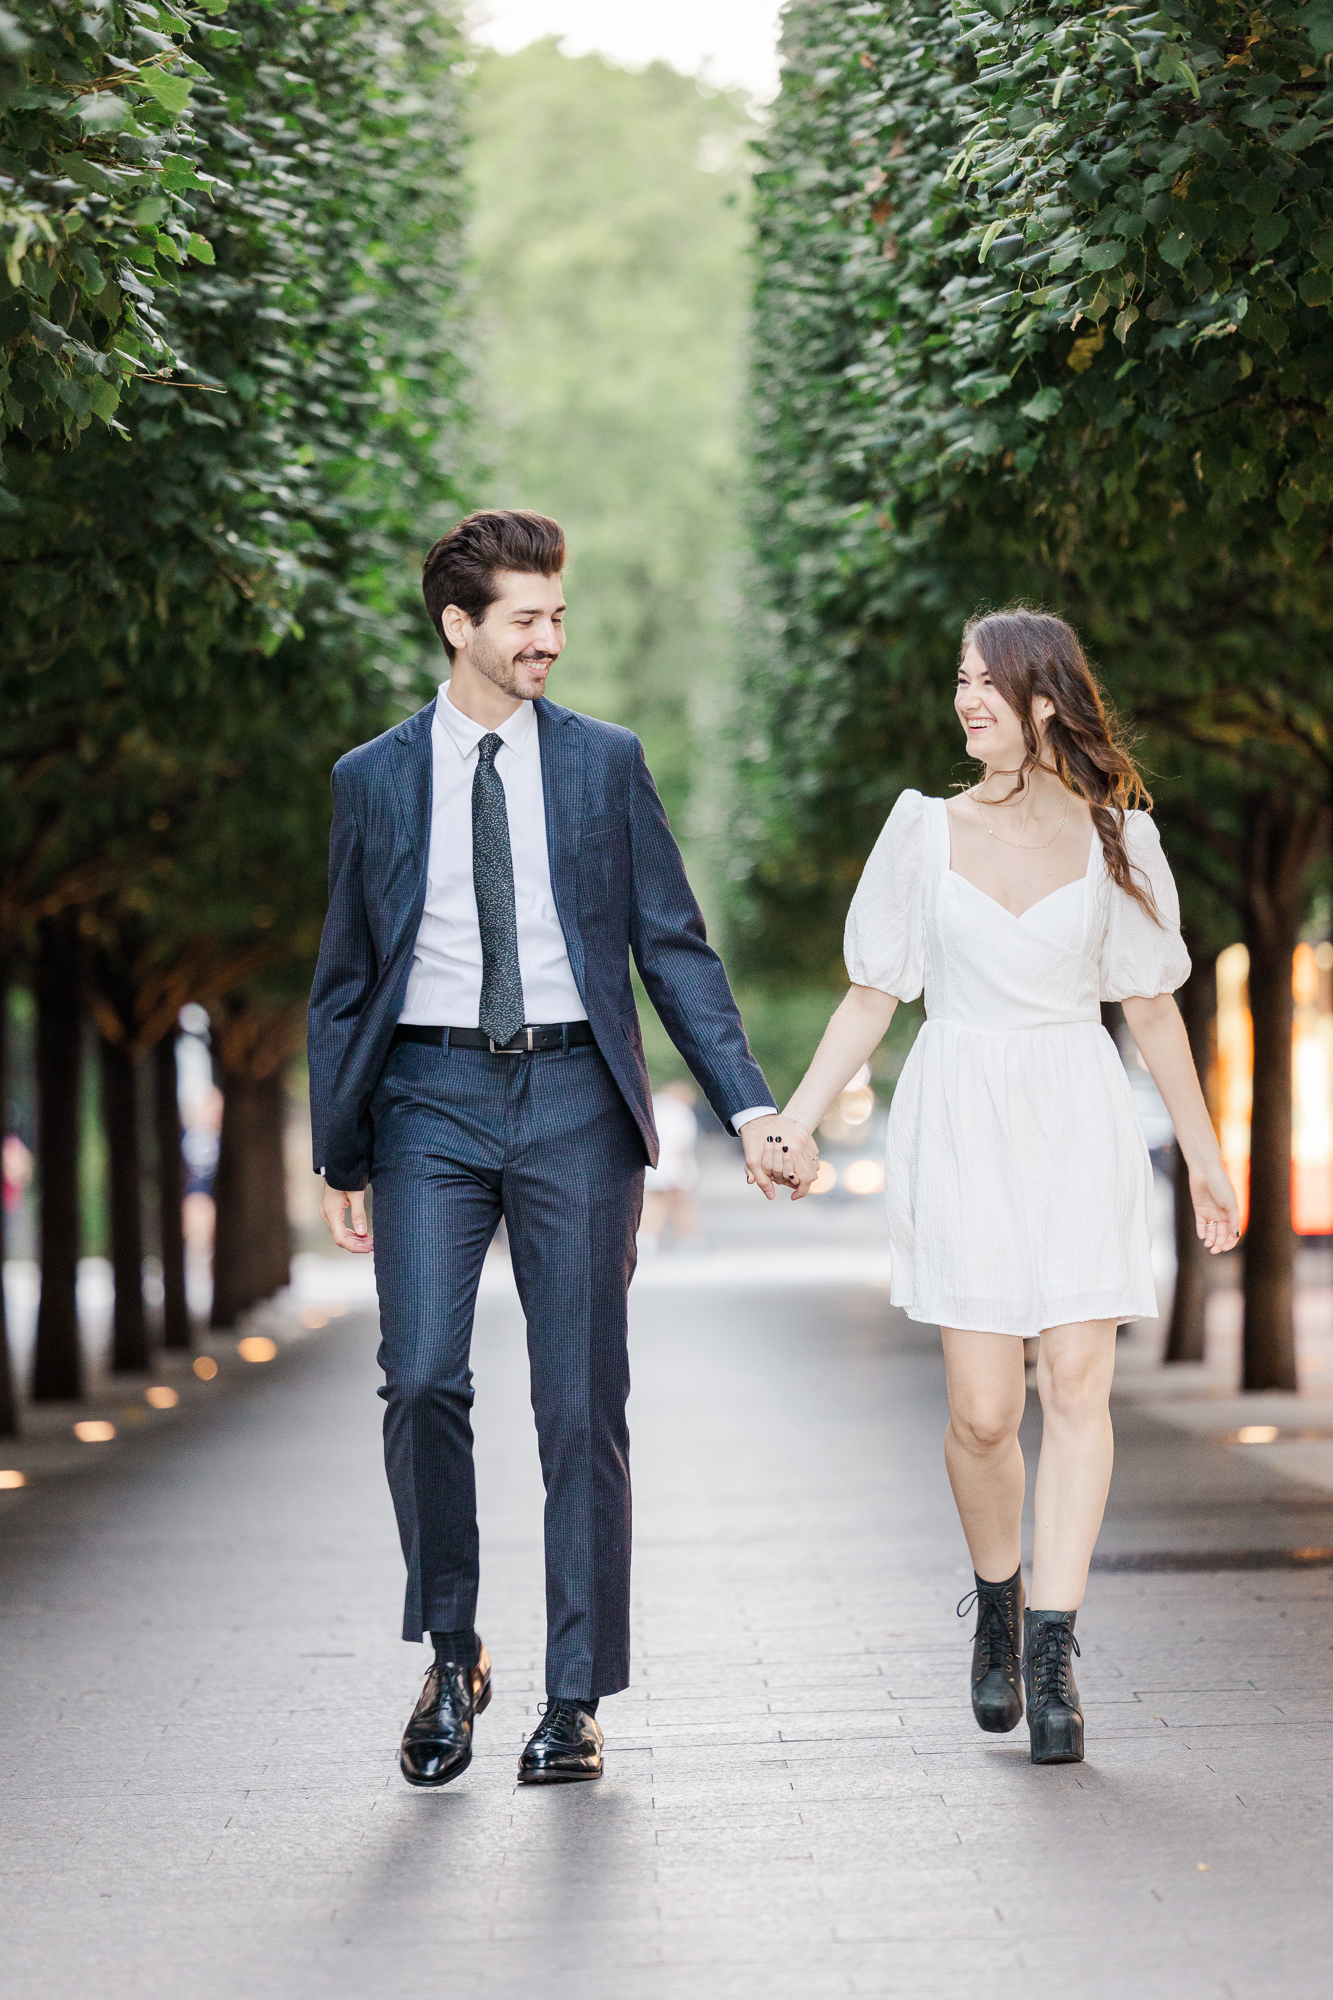 Sensational Central Park Engagement Photos in NYC